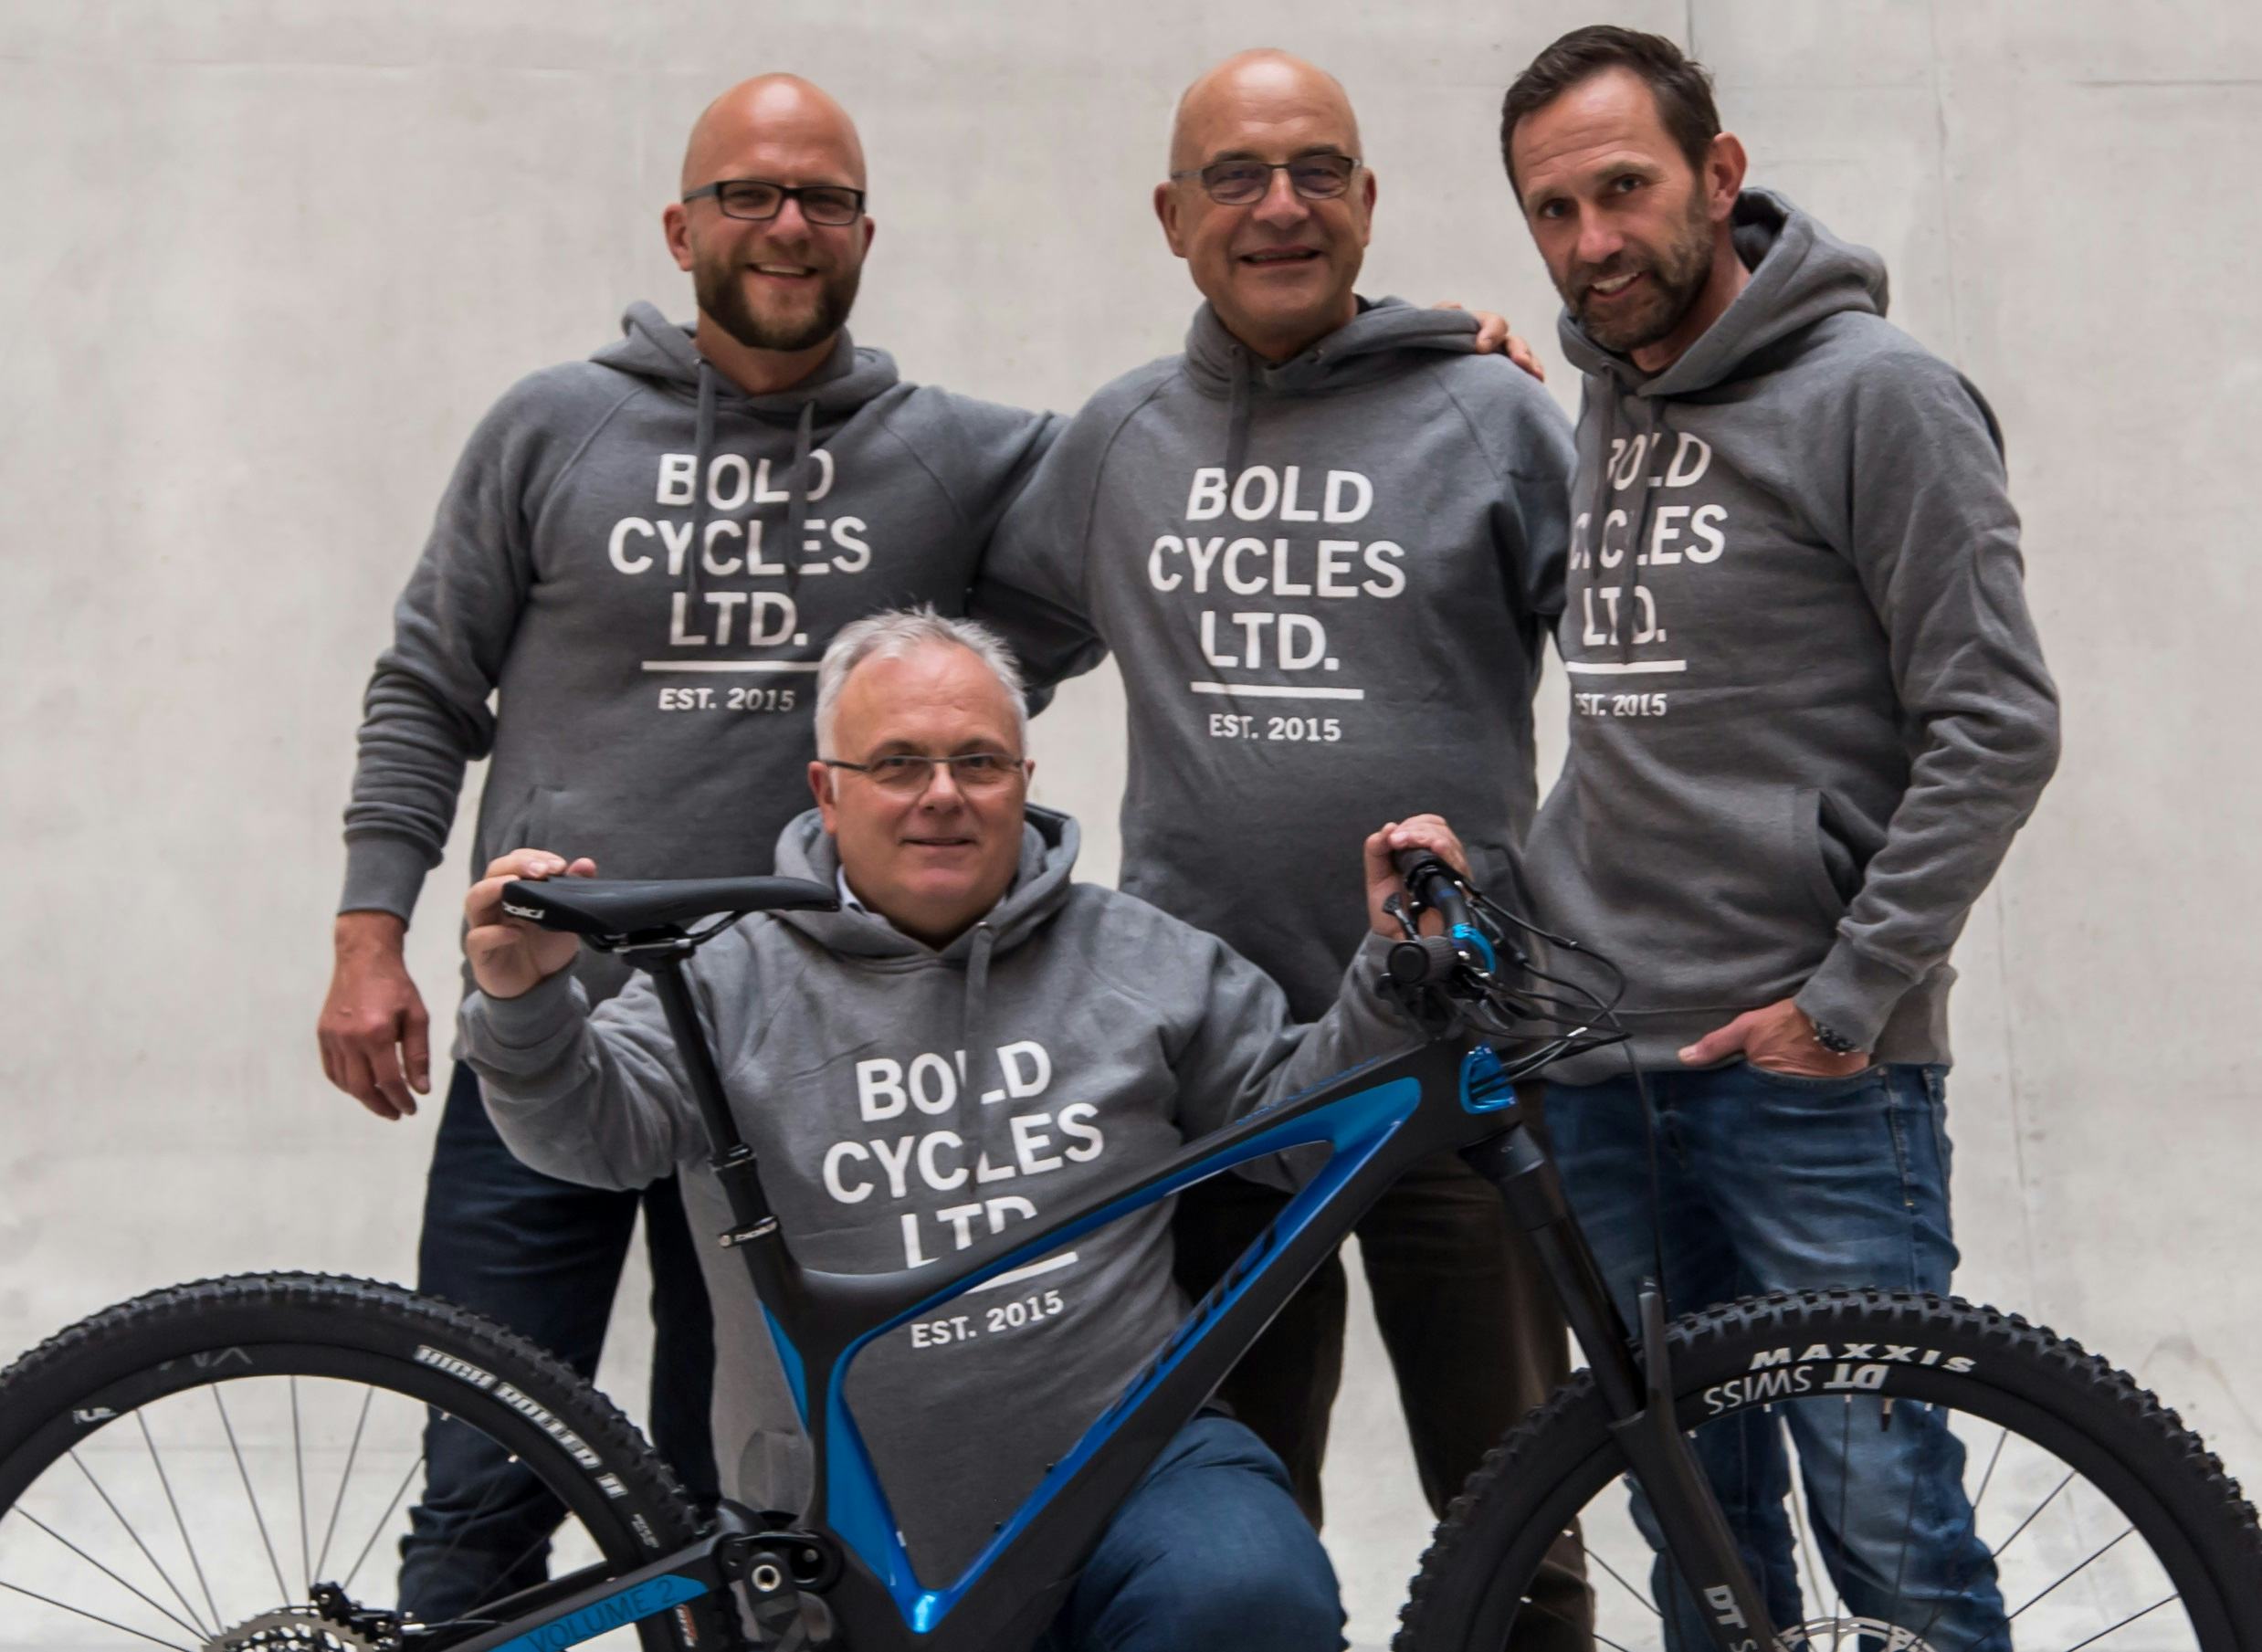 Strong together: Scott Sports Group CEO Beat Zaugg (kneeling) as well as from left to right Vincenz and Robert Droux of Bold Cycles and Scott Sports Group VP Pascal Ducrot. – Photo Scott Sports Group